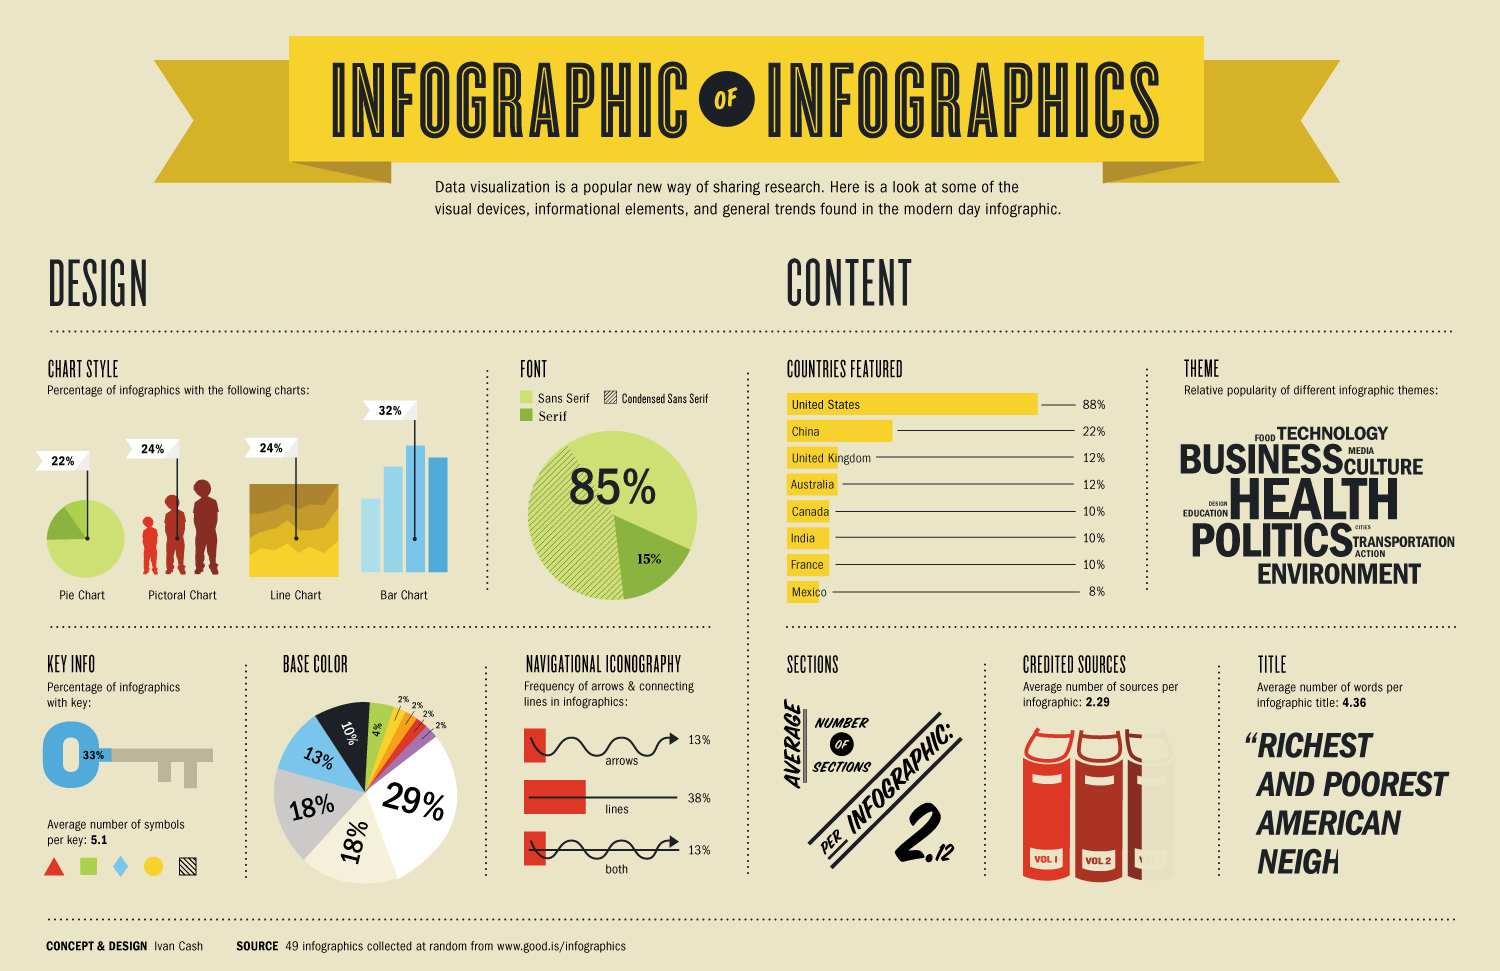 How to create infographics in 5 simple steps